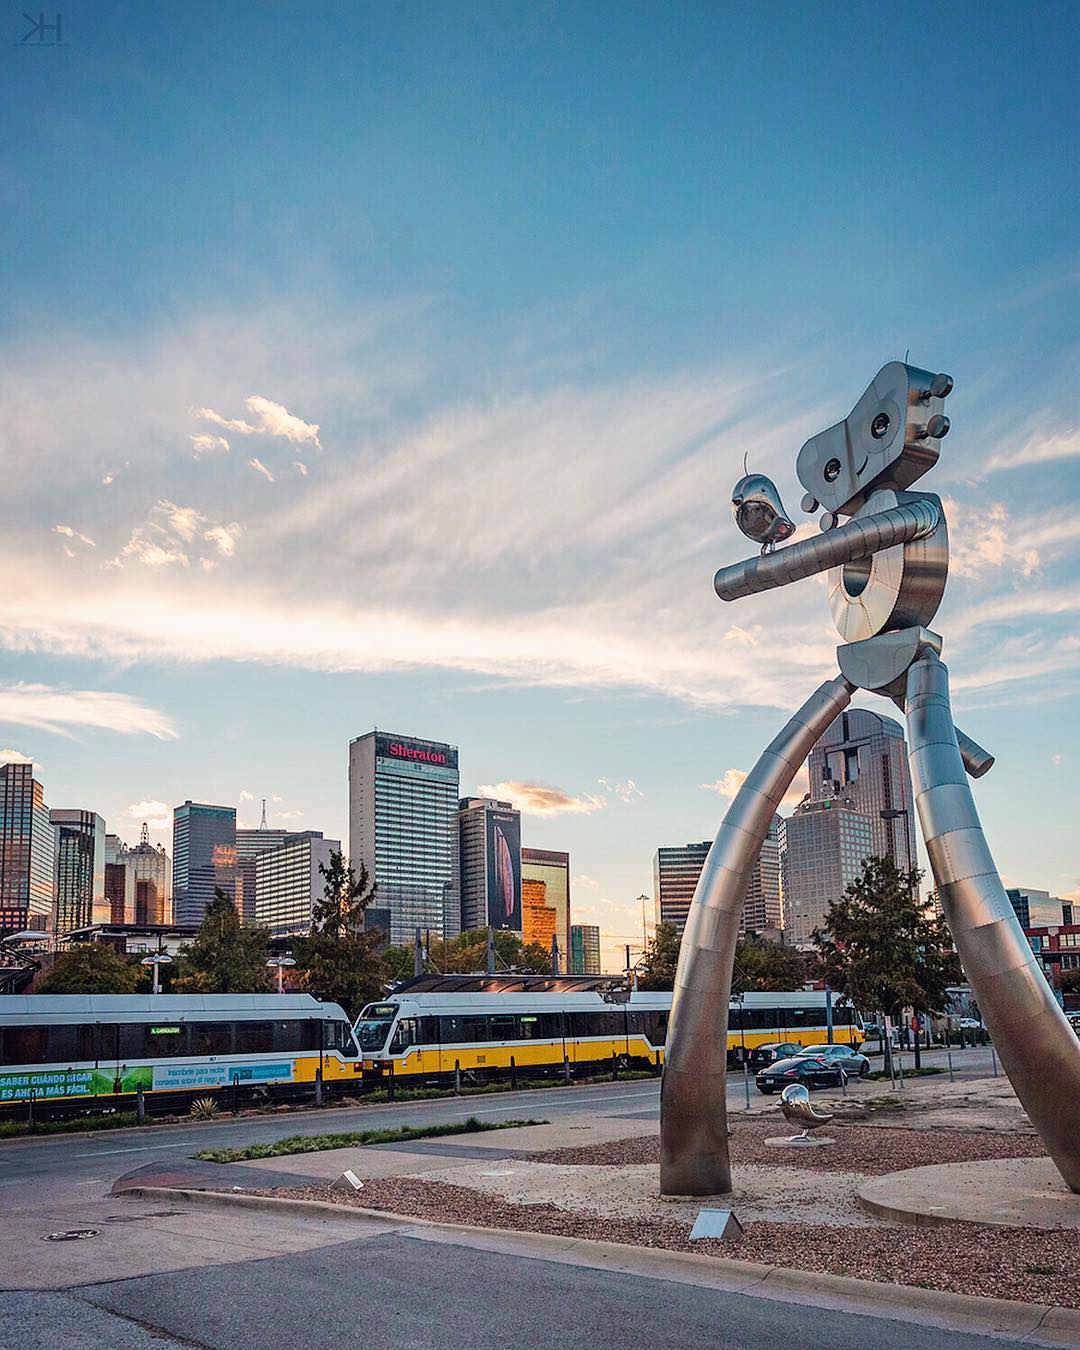 Large metal sculpture with train and Fort Worth skyline in background Photo by Instagram user @kevinhannphoto